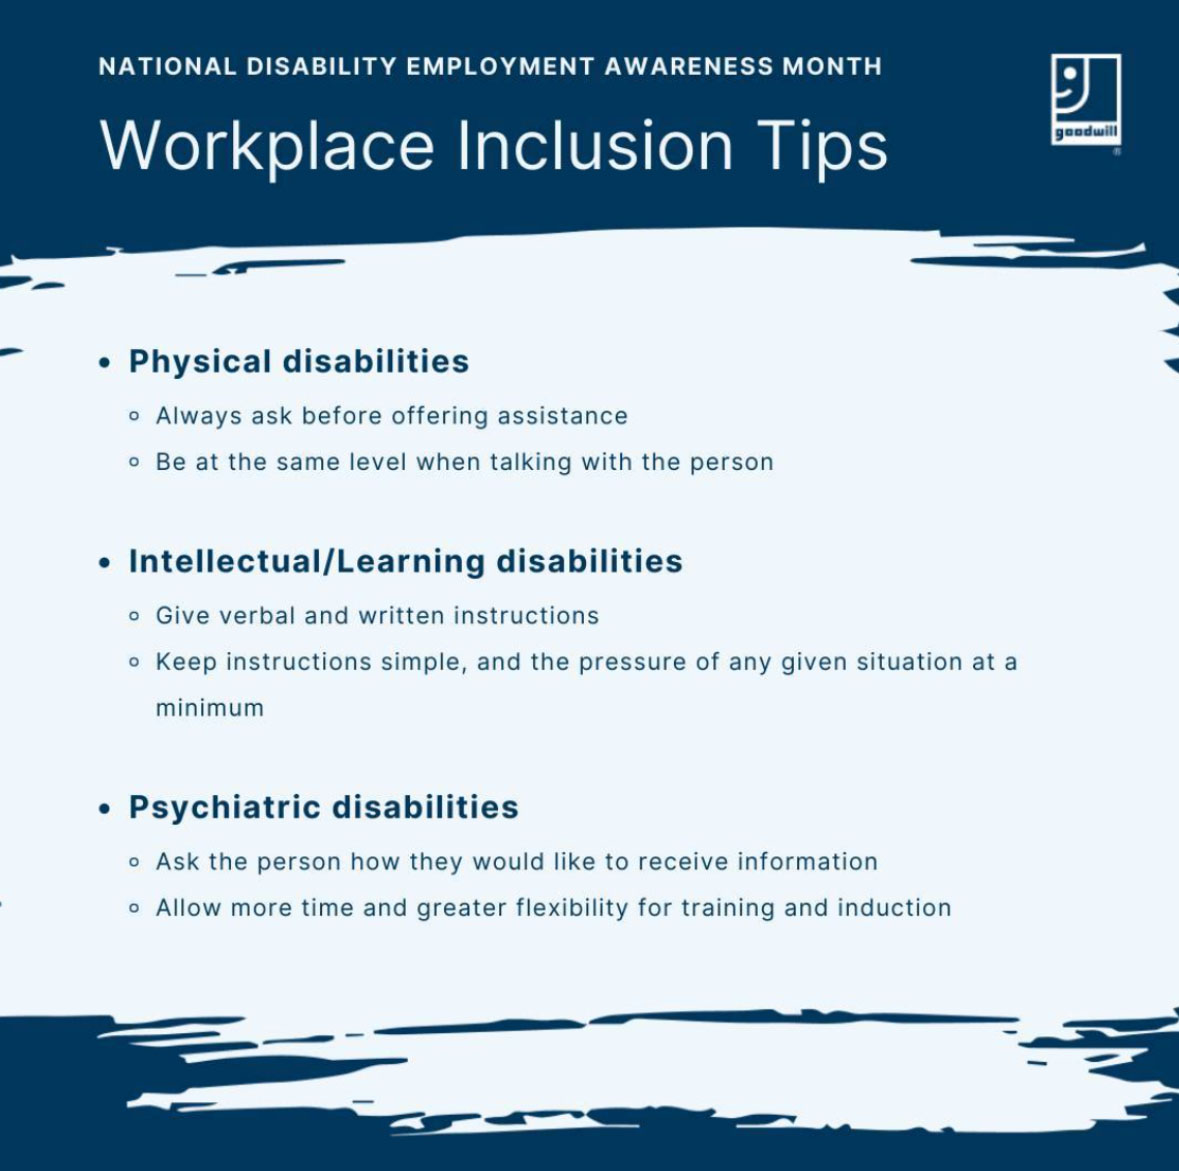 infographic showing inclusion tips for physical, learning, and psychiatric disabilities